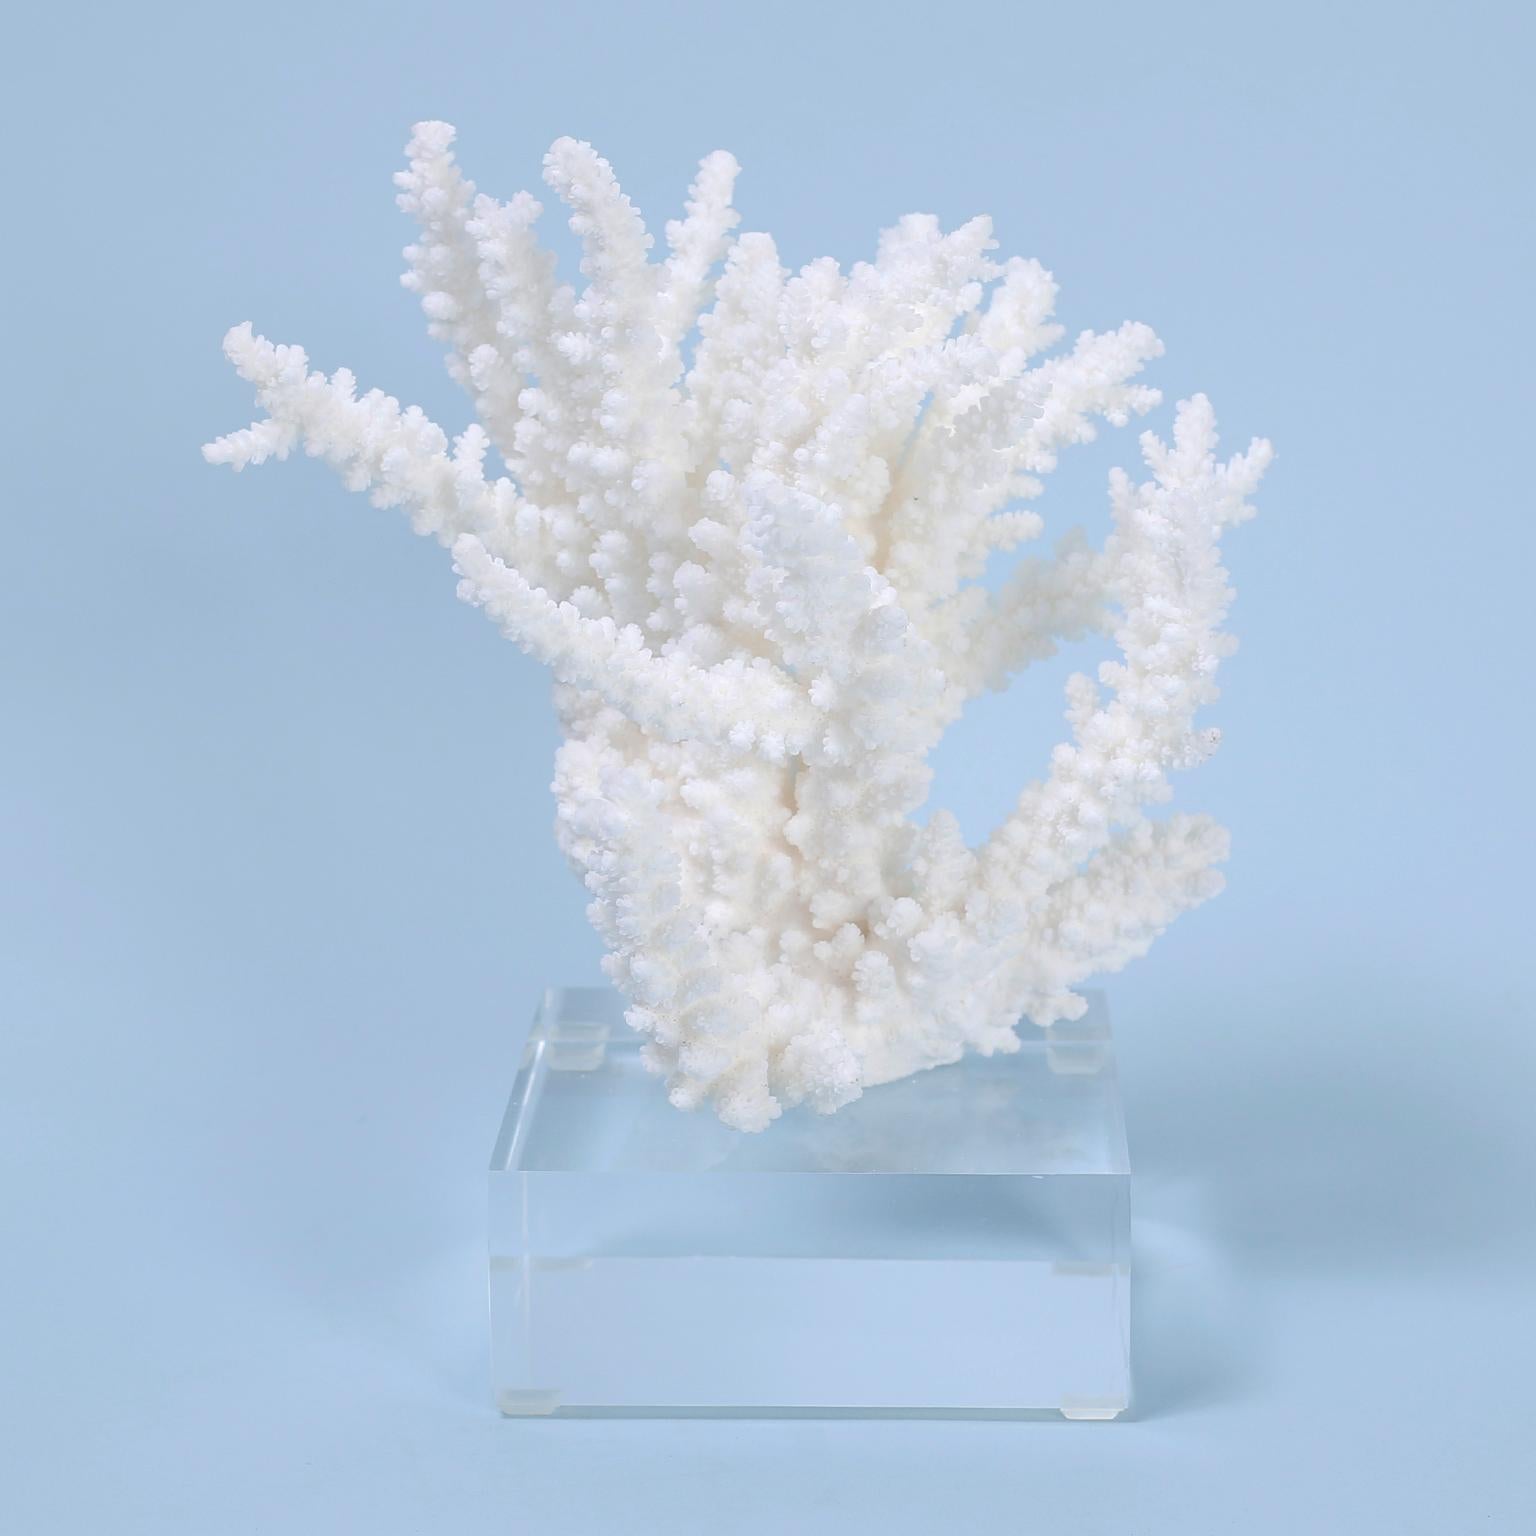 Three pieces of authentic sustainable branch coral specimens each with its own unique sea inspired form, organic texture, and bleached white color. Presented on custom Lucite bases to enhance the sculptural elements. Priced individually.

From